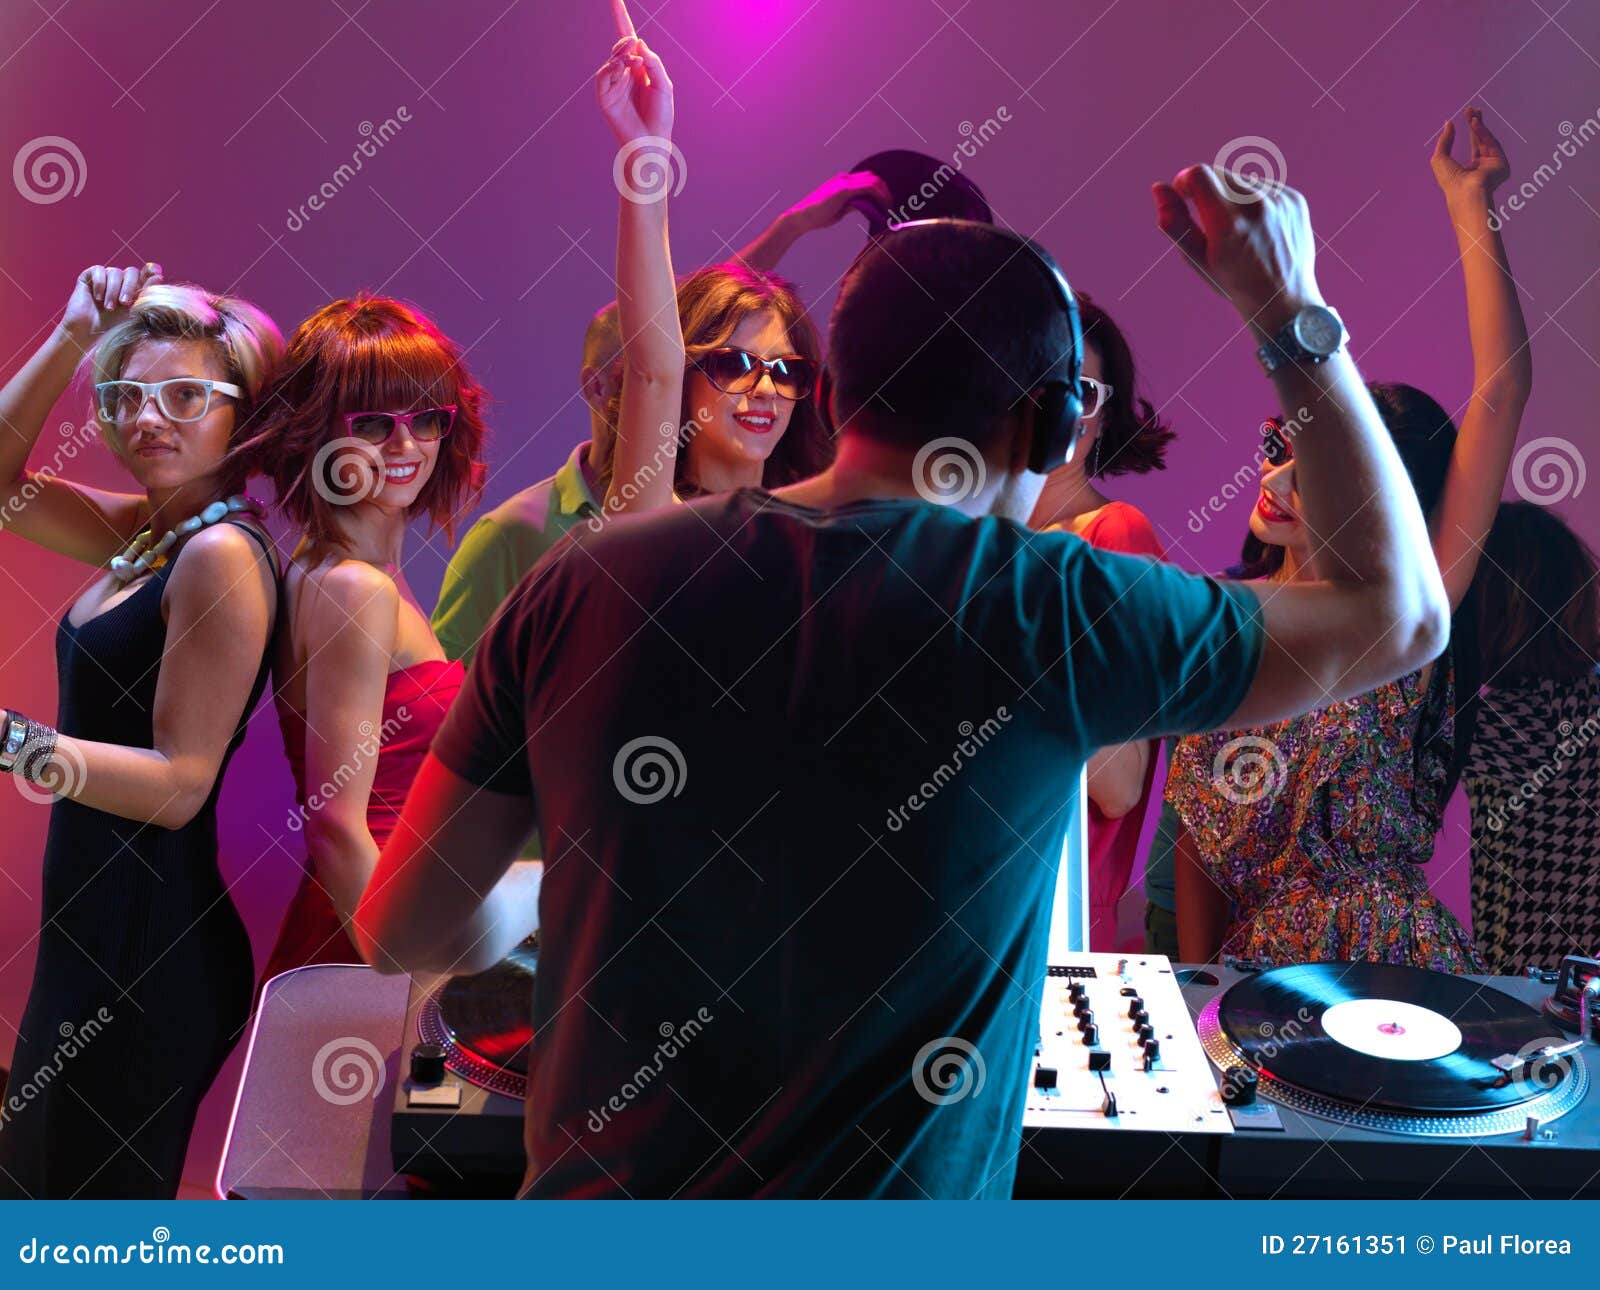 Dj Playing Music in Night Club Stock Image - Image of late, cool: 27161351